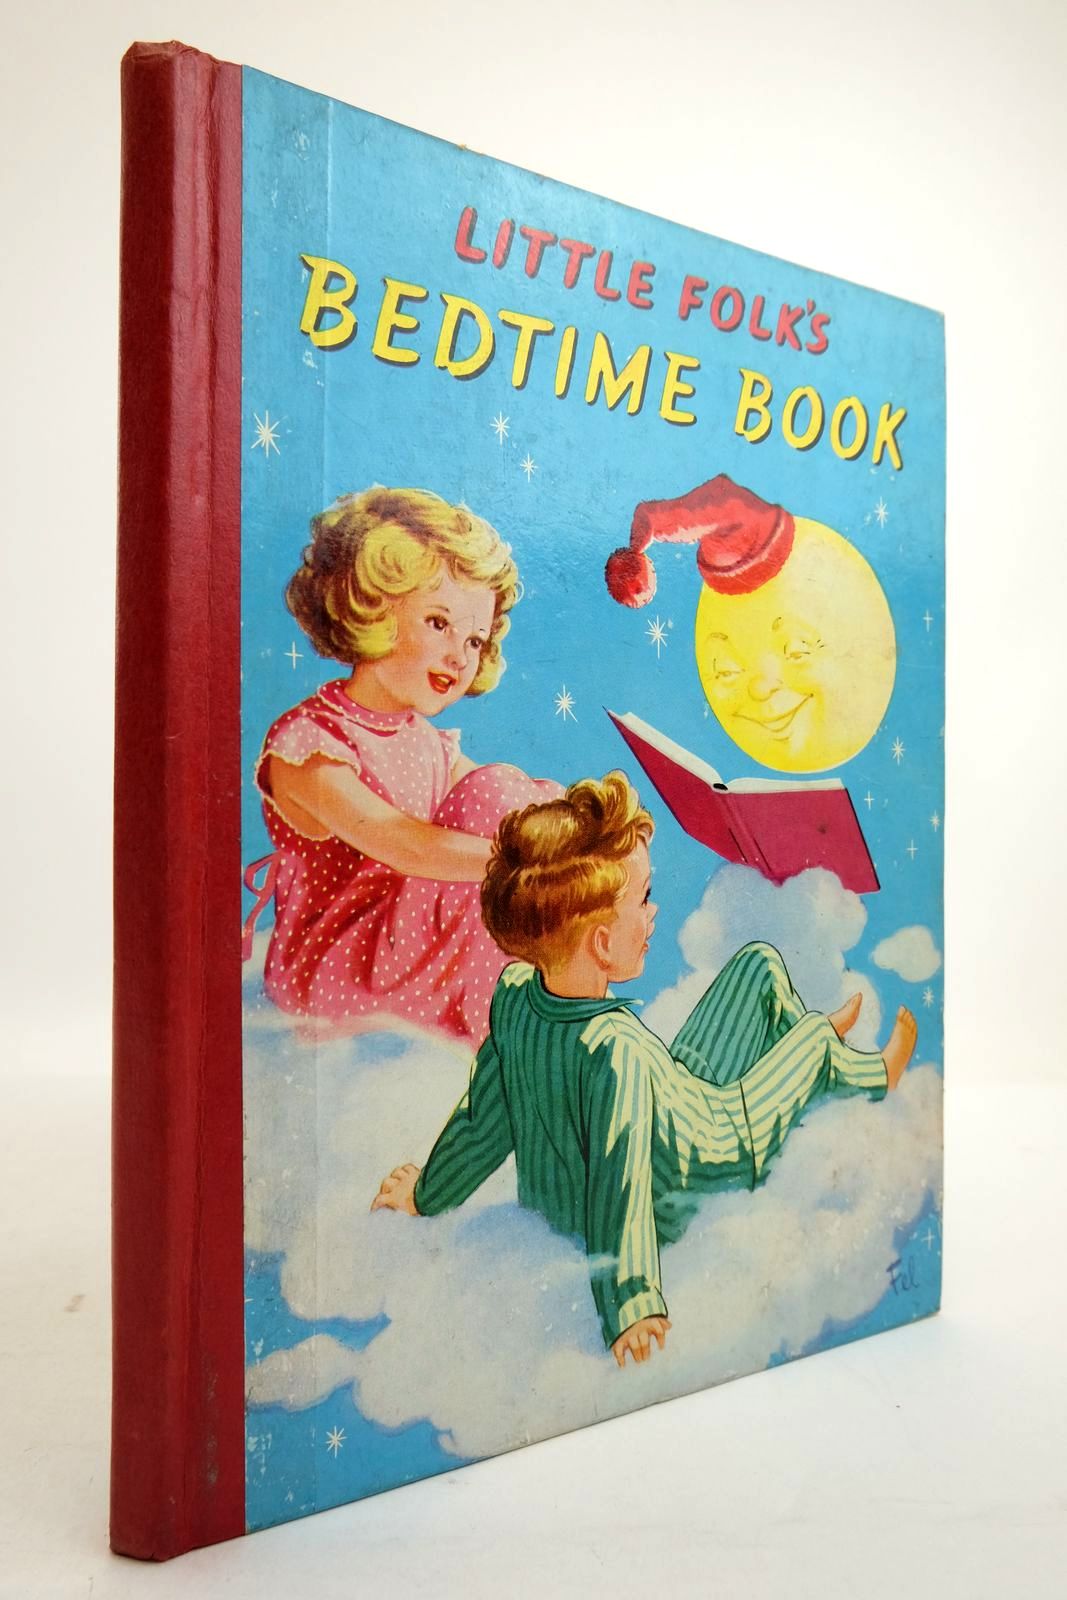 Photo of LITTLE FOLK'S BEDTIME BOOK written by Coombs, Betty et al,  illustrated by Fel,  published by Juvenile Productions Ltd. (STOCK CODE: 2134470)  for sale by Stella & Rose's Books